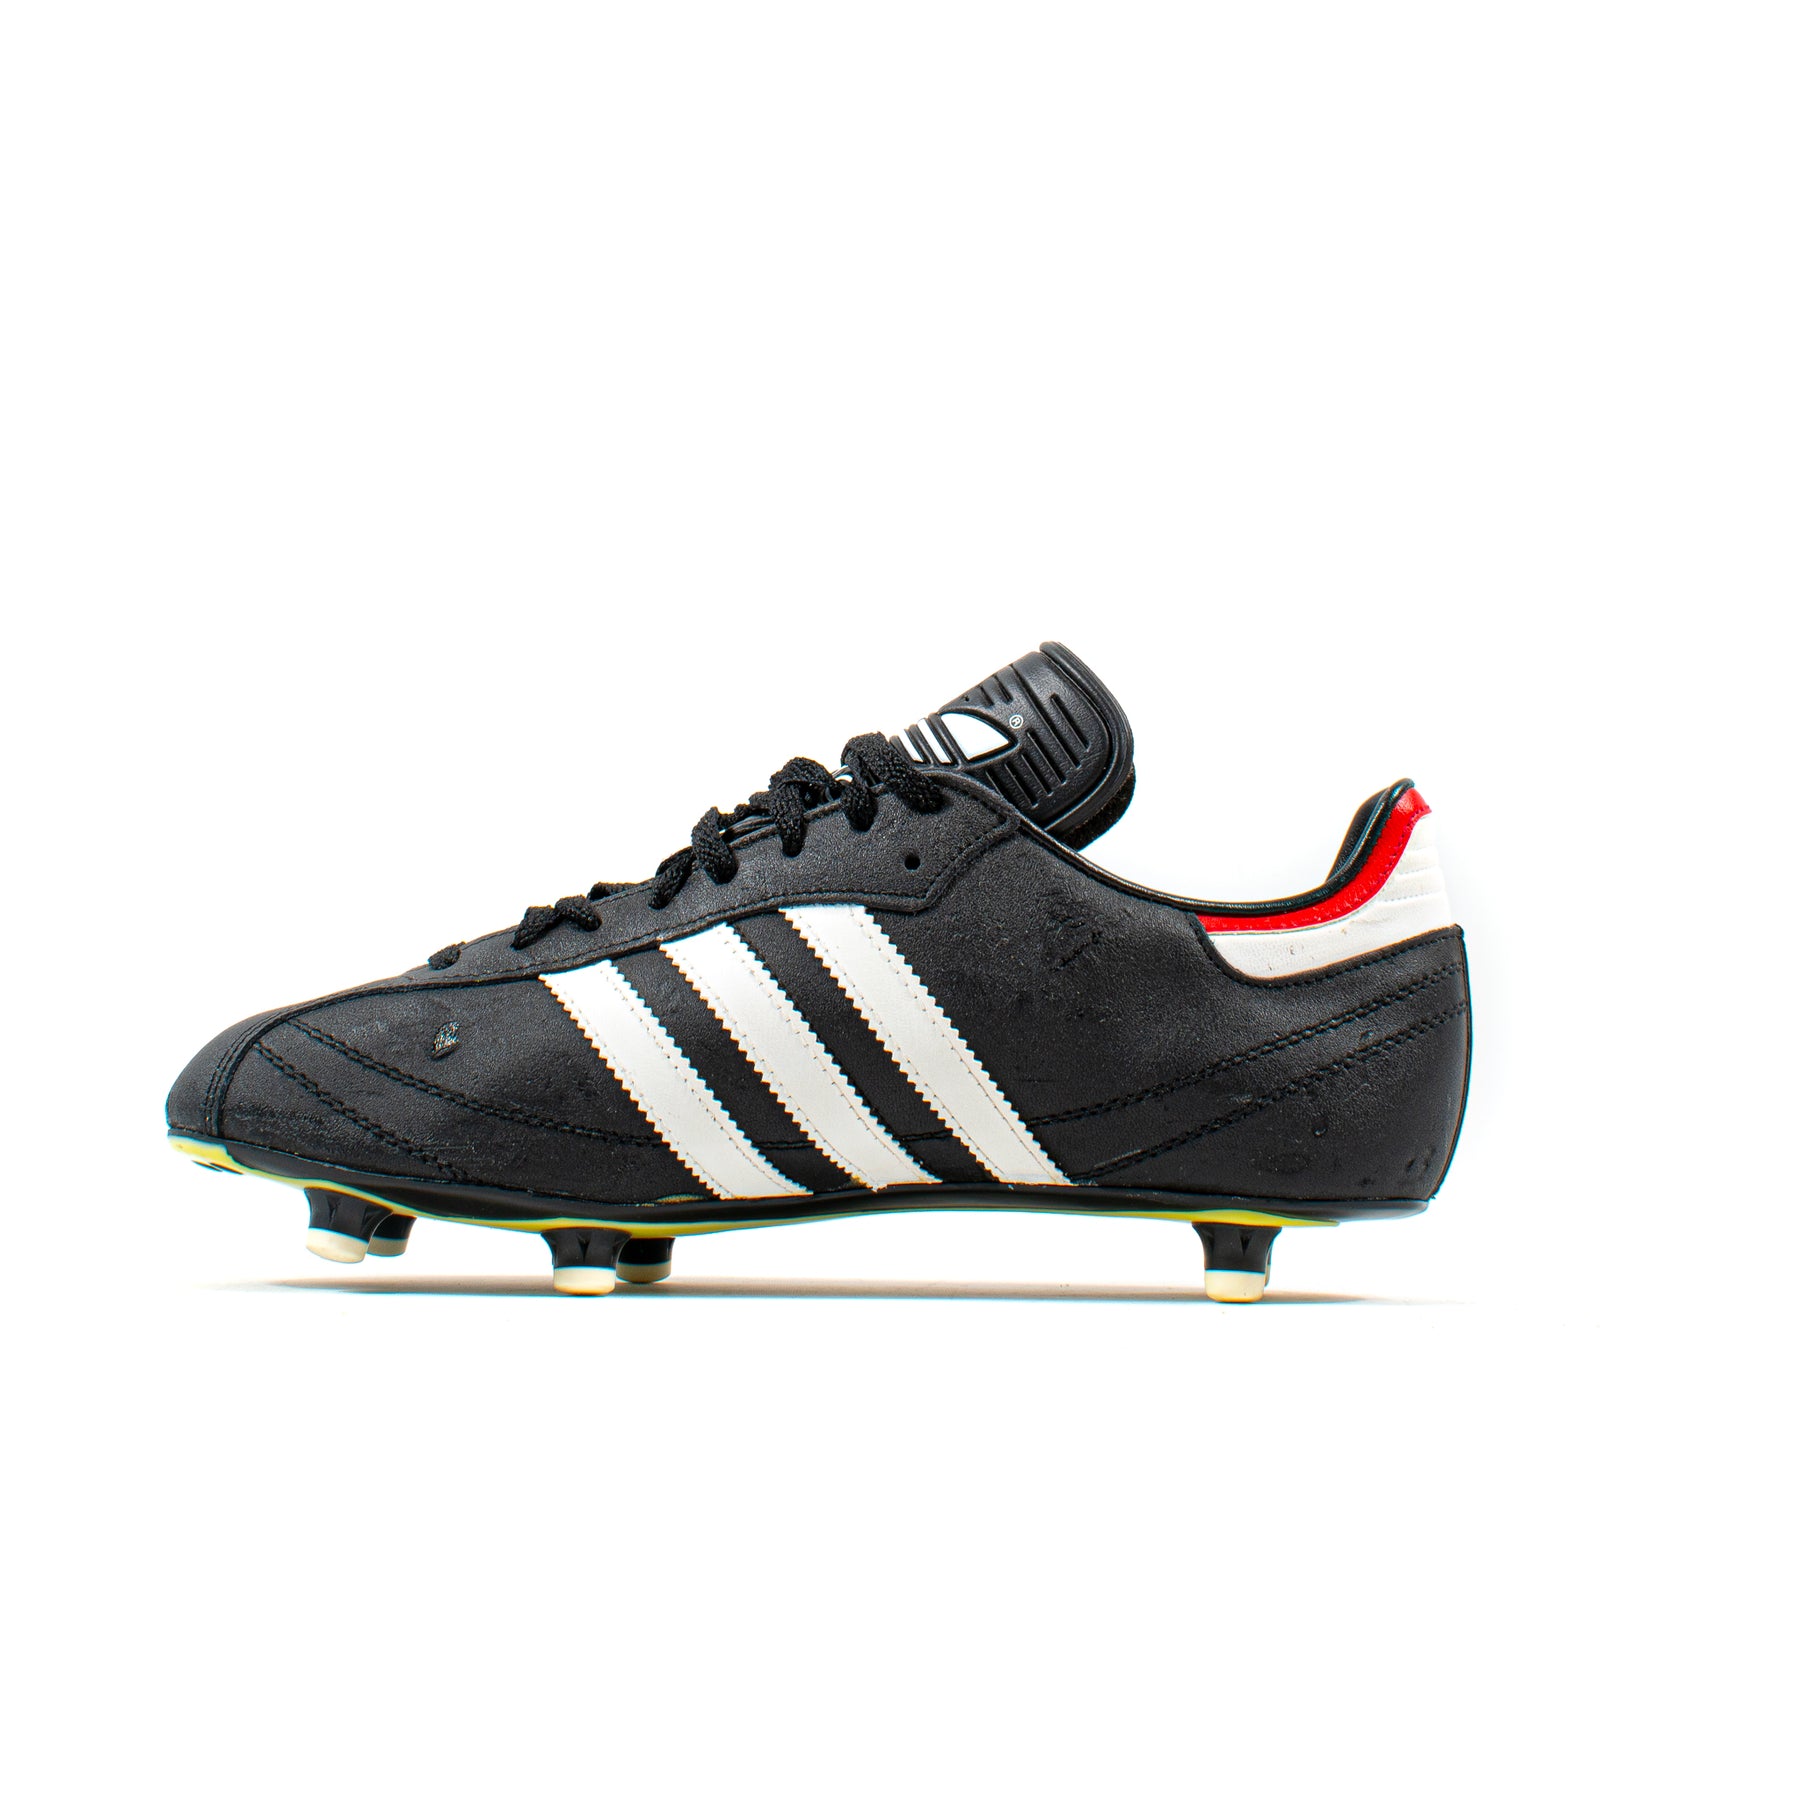 Adidas Adi Dassler Football Boots 1980s Vintage – Classic Soccer Cleats